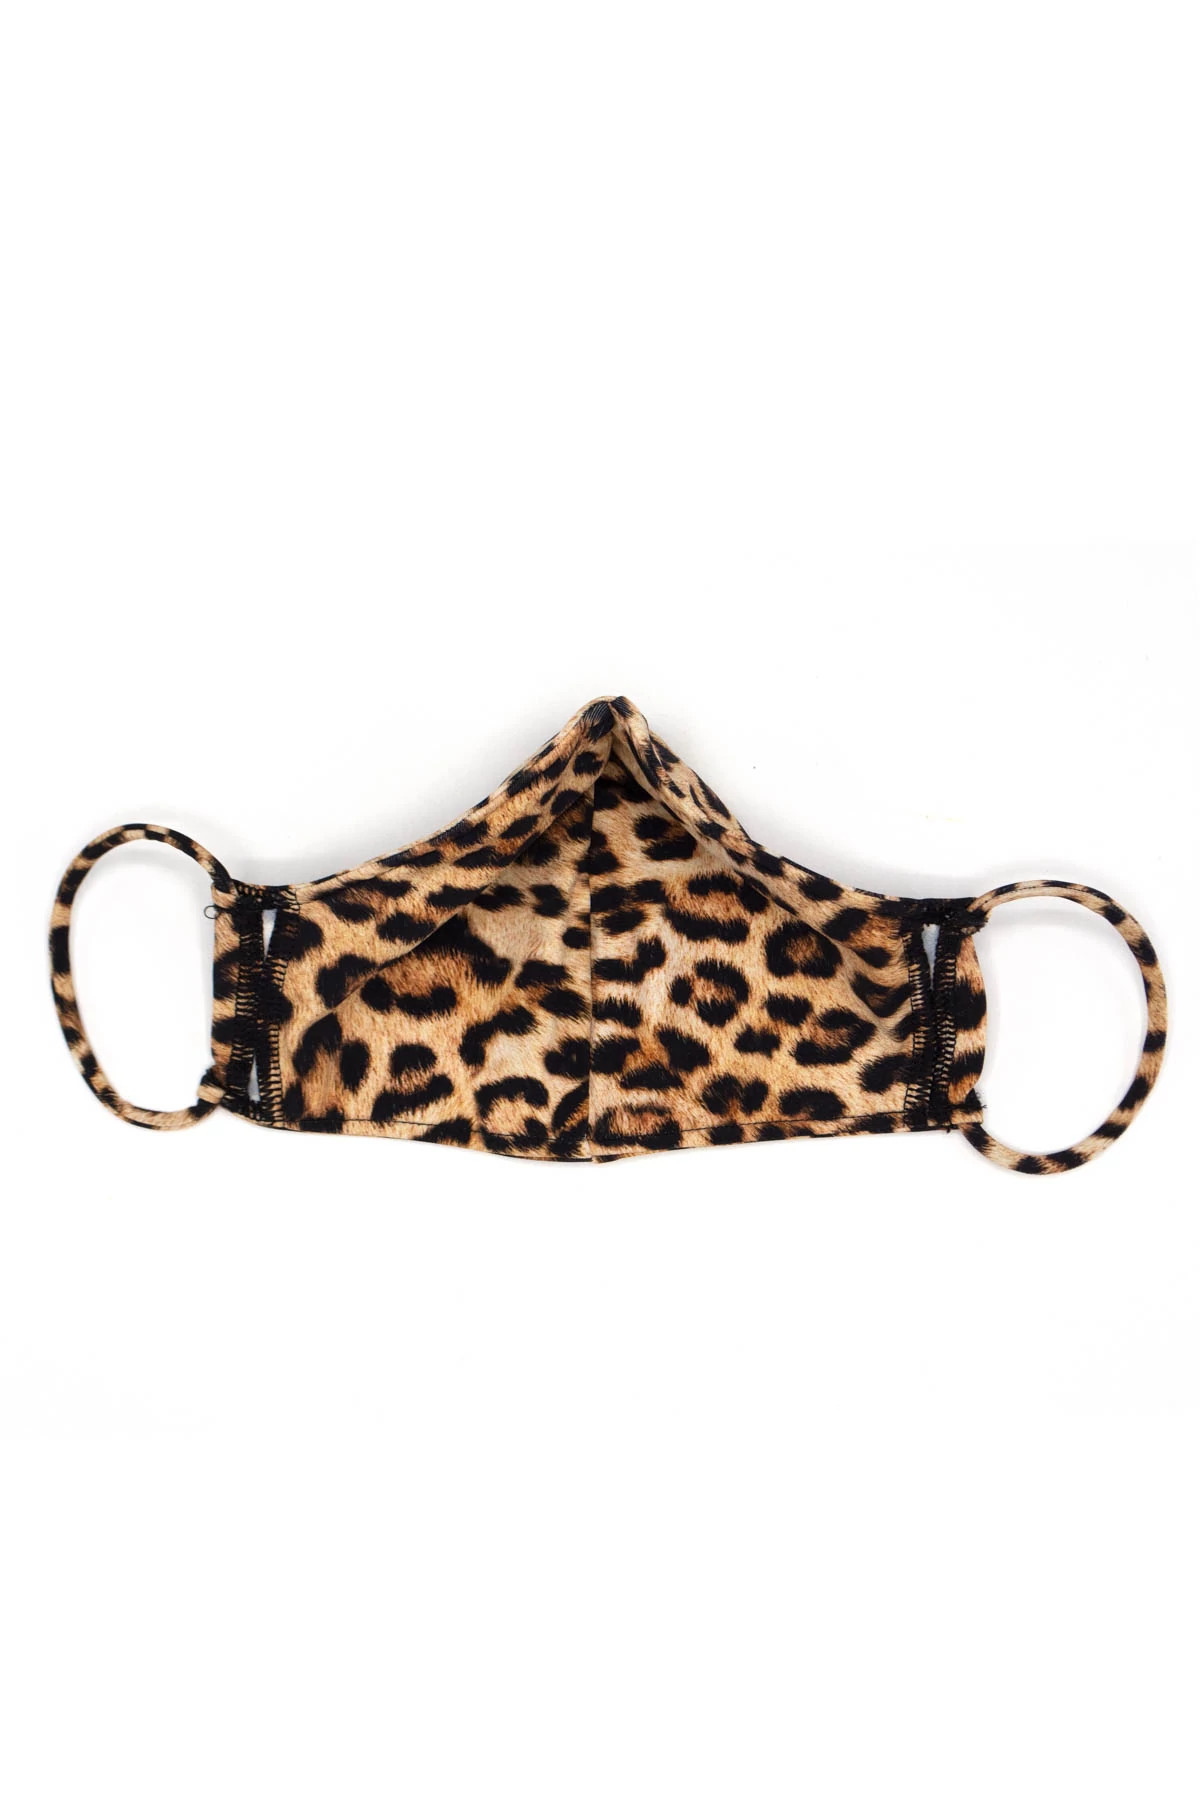 MULTI Wild One Leopard Adult Face Mask image number 3